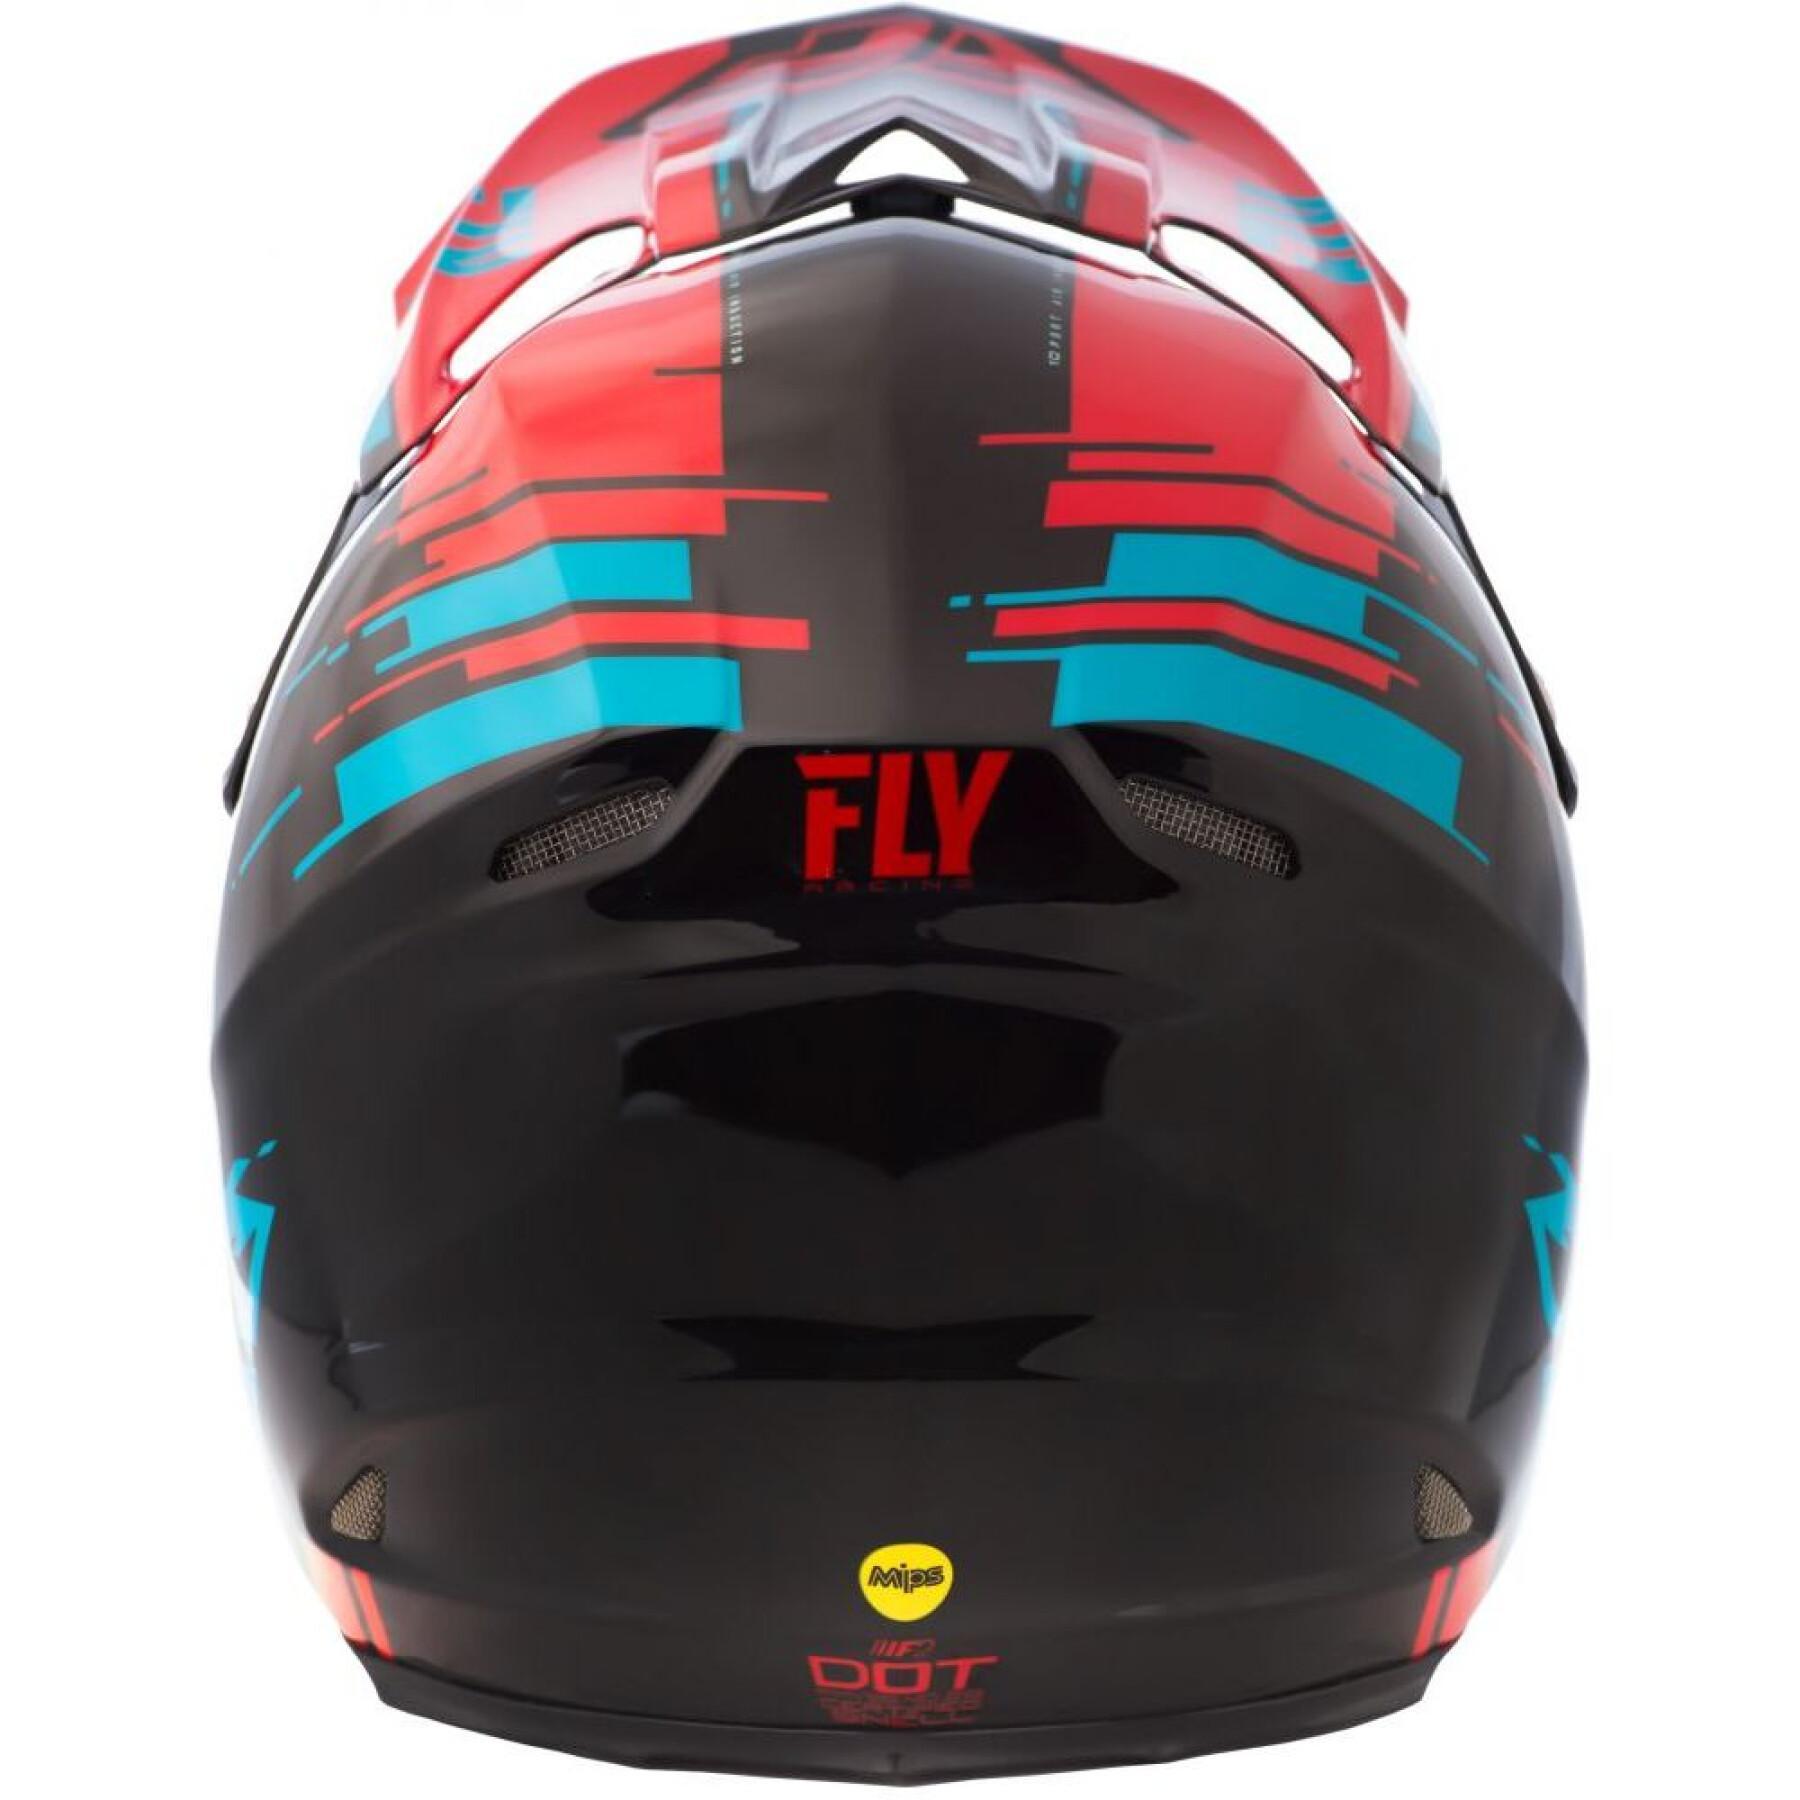 Motorrad-Crosshelm Fly Racing F2 Carbon 2018 Forge MIPS